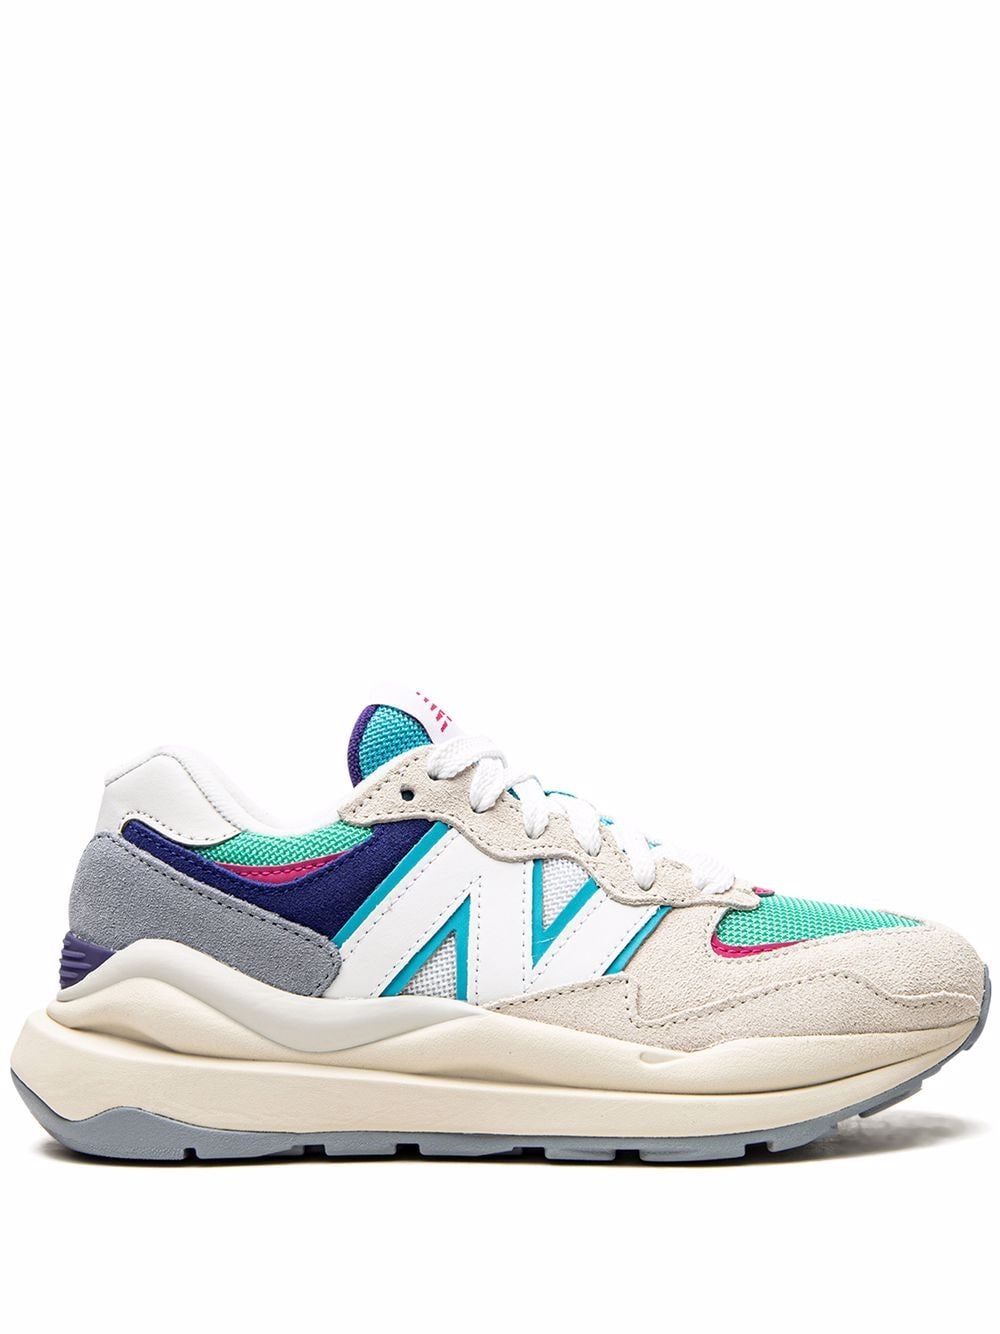 Image 1 of New Balance 57/40 low-top sneakers